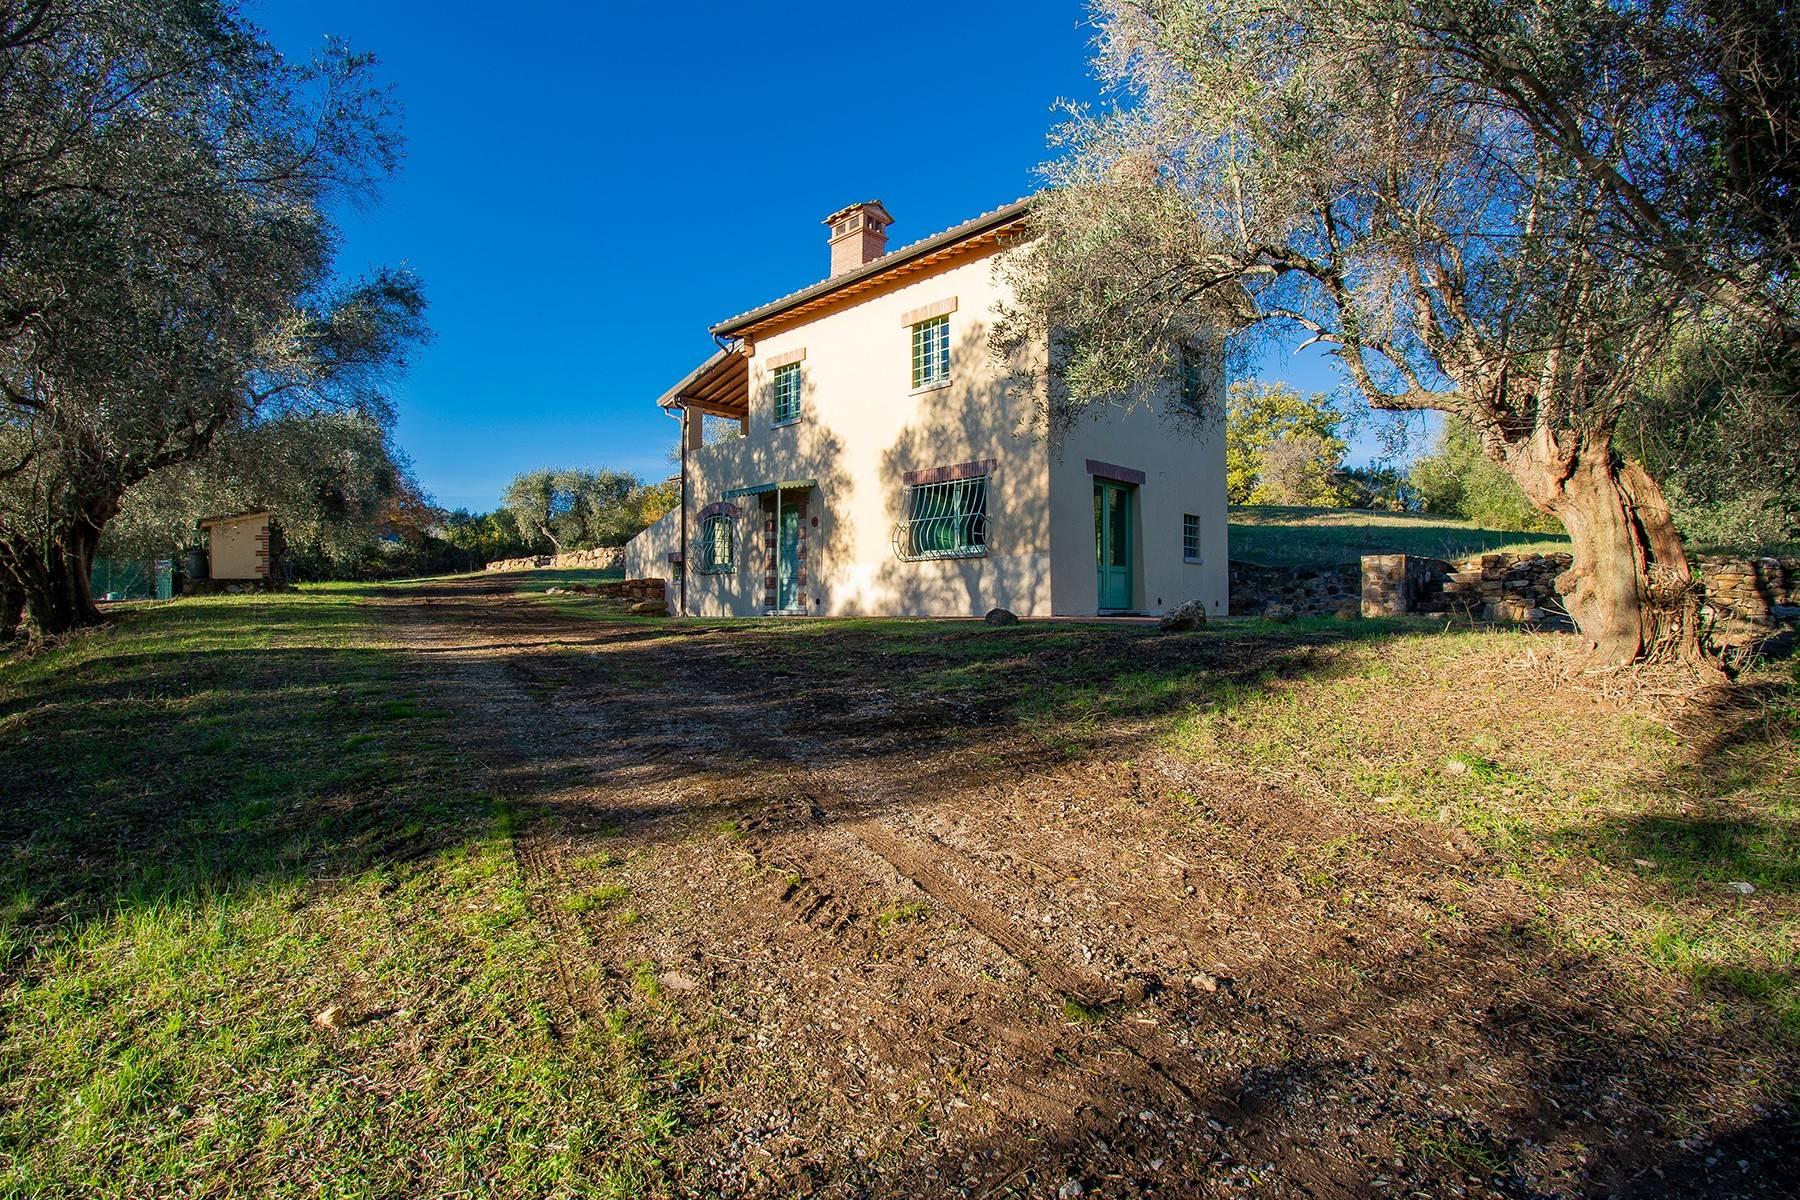 Newly-built farmhouse nestled in the olive groves - 3